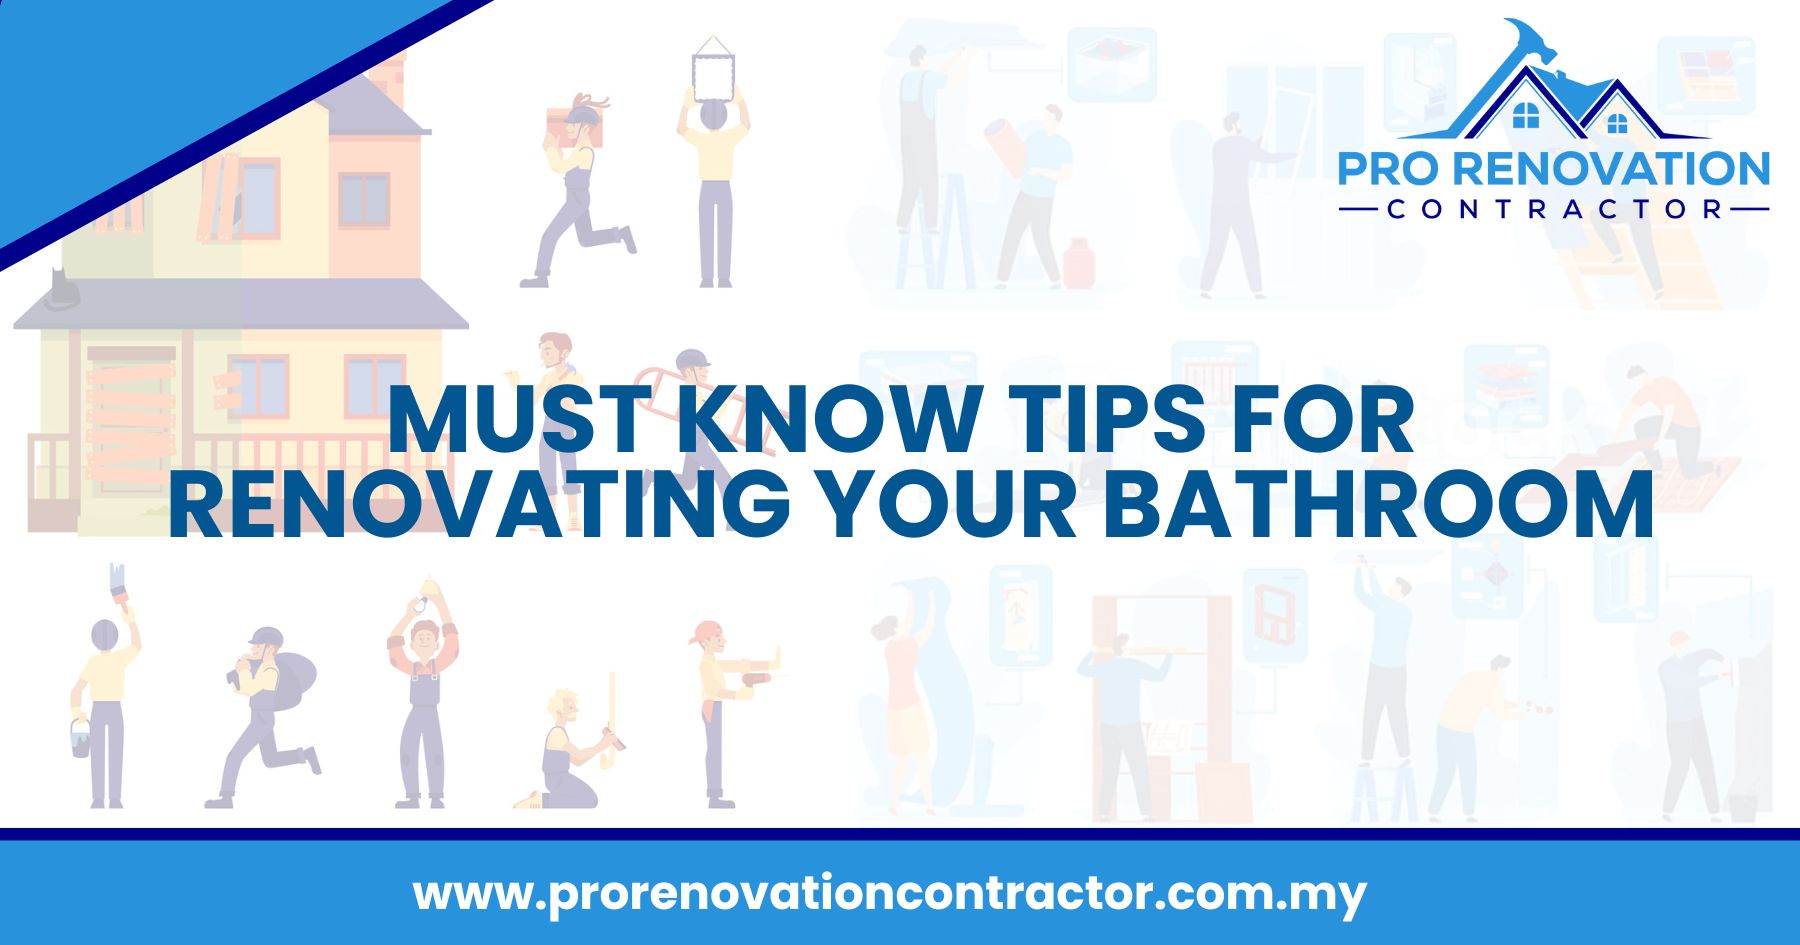 Must Know Tips for Renovating Your Bathroom